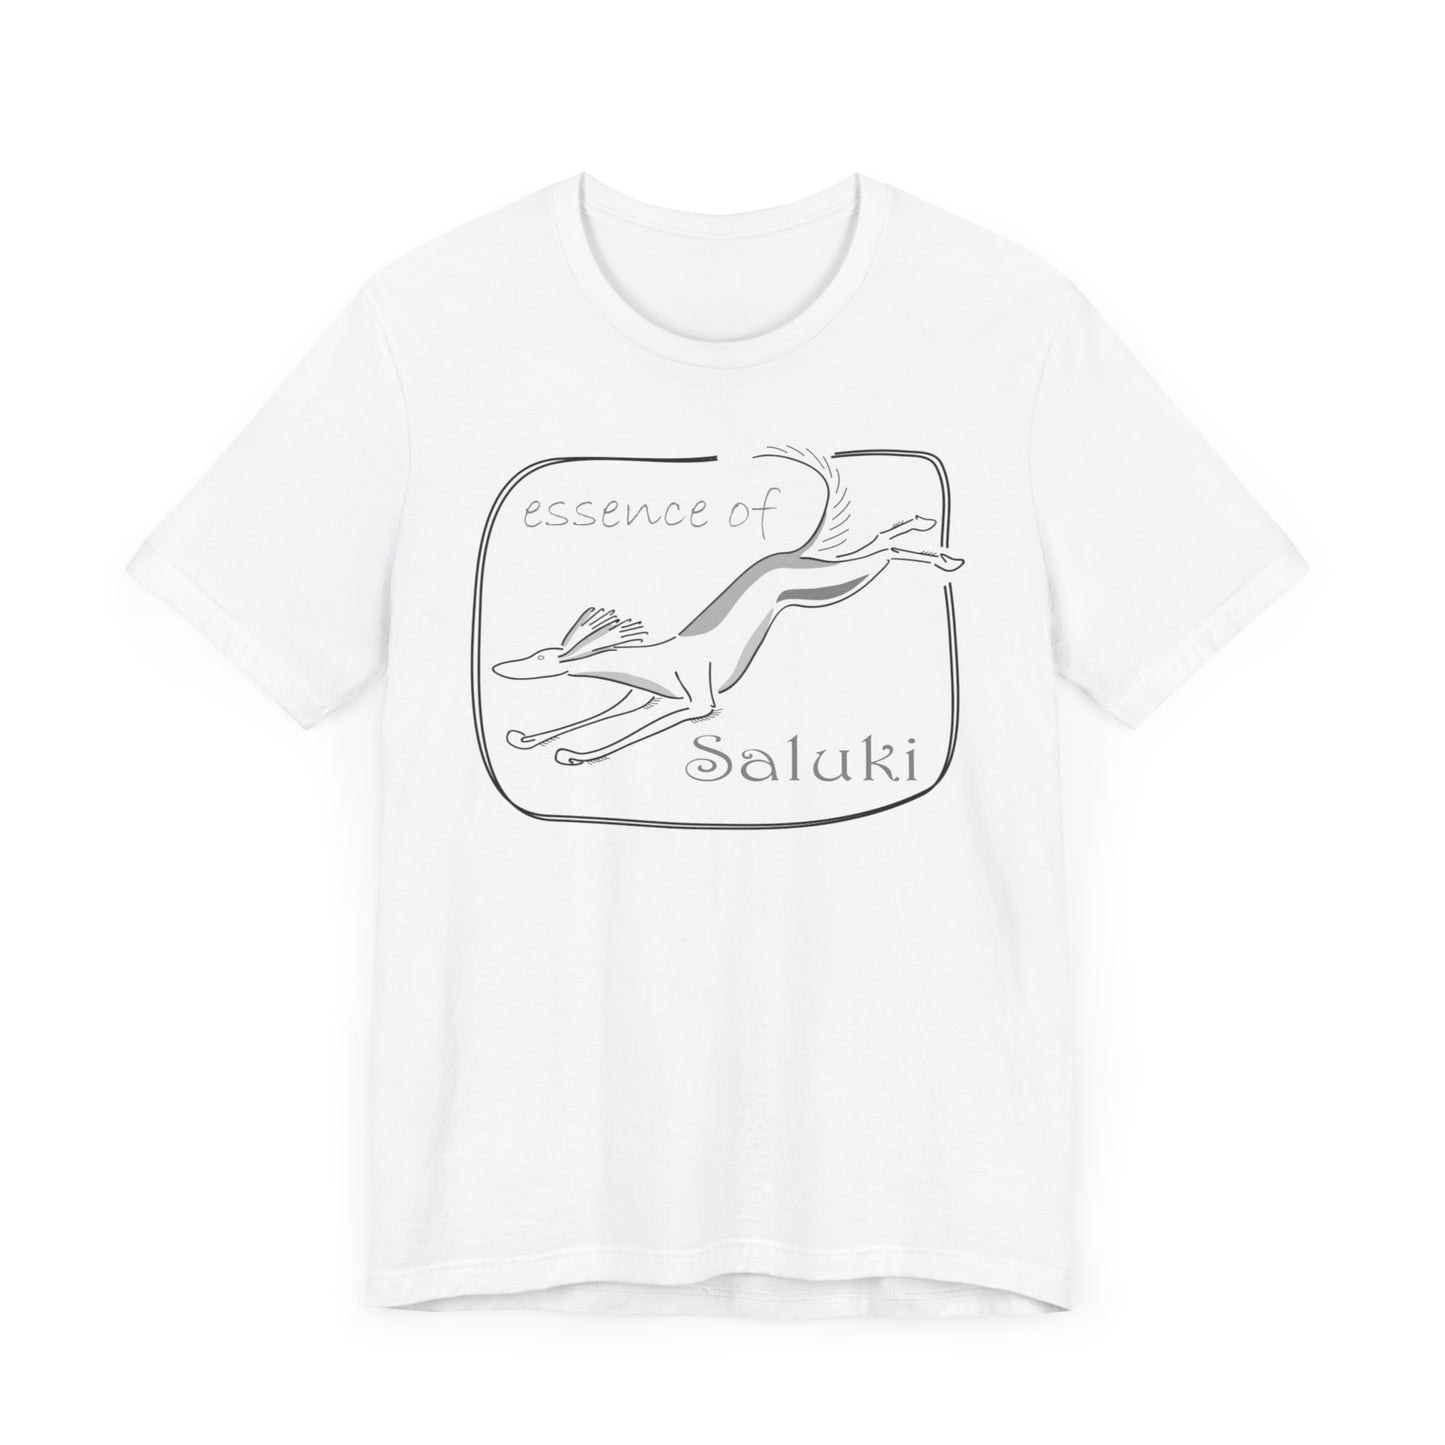 Unisex Jersey Short Sleeve Tee in white featuring a Saluki dog breed in full flight.